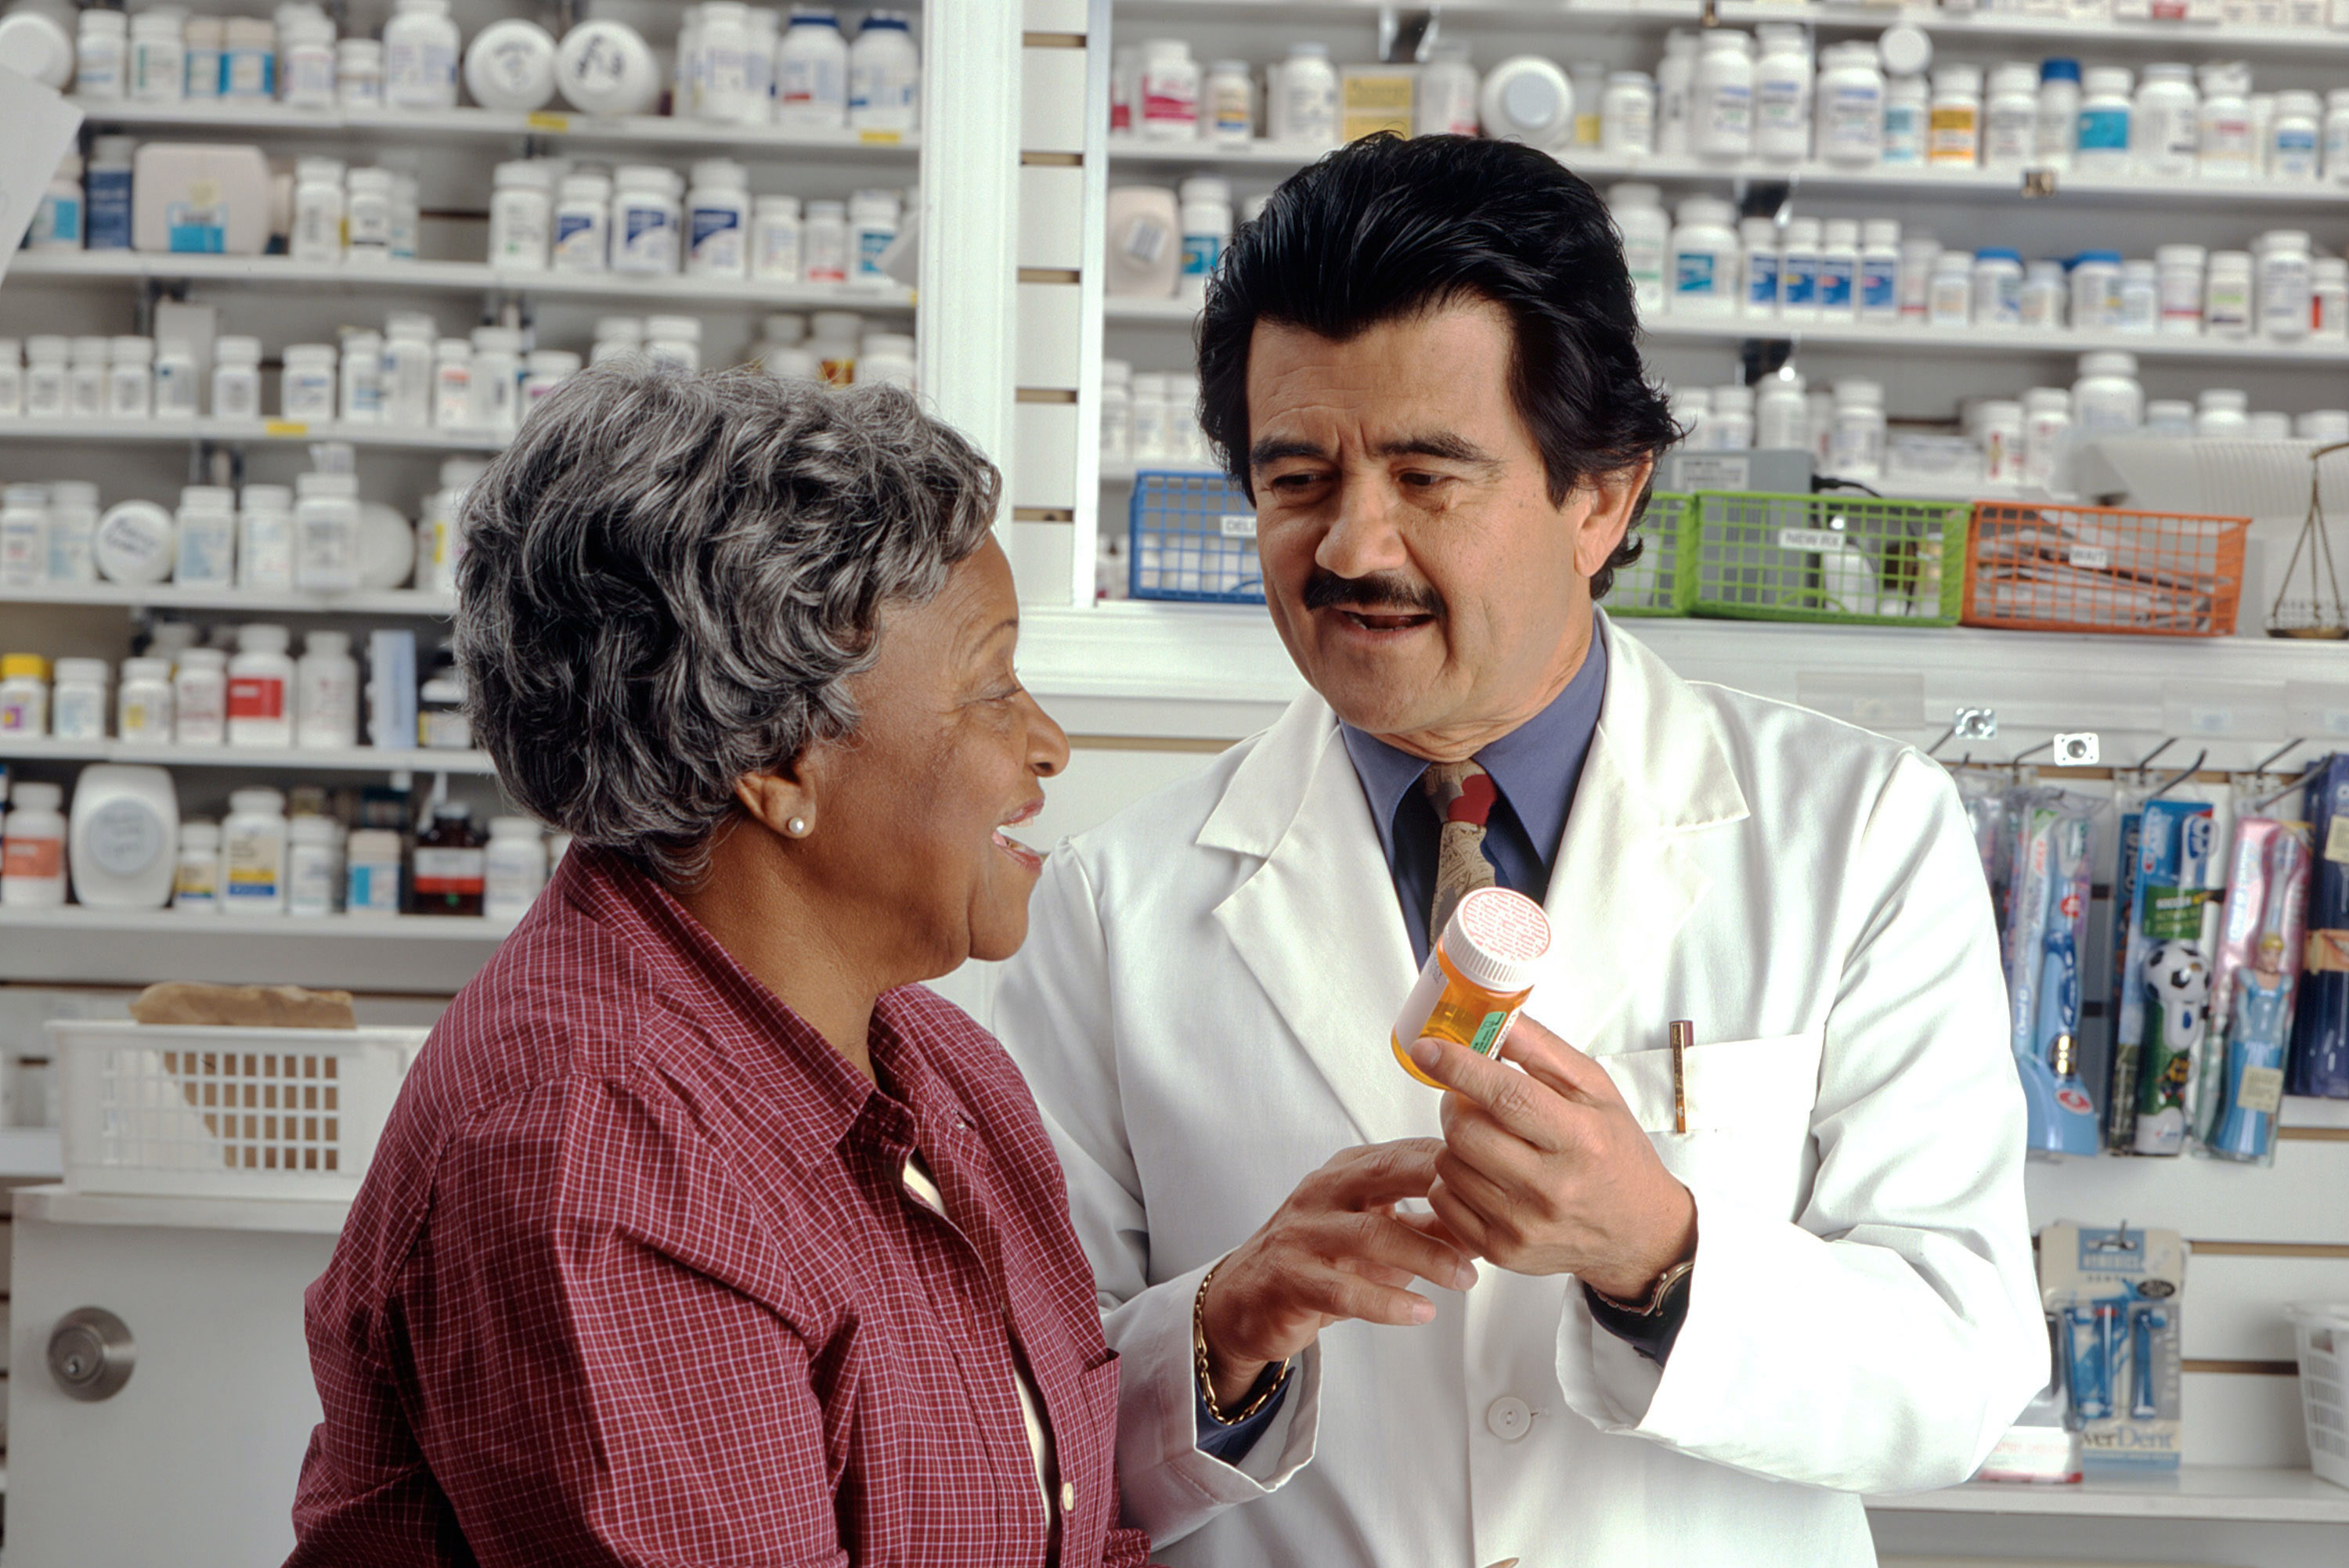 How To Become A Pharmacist In Nj